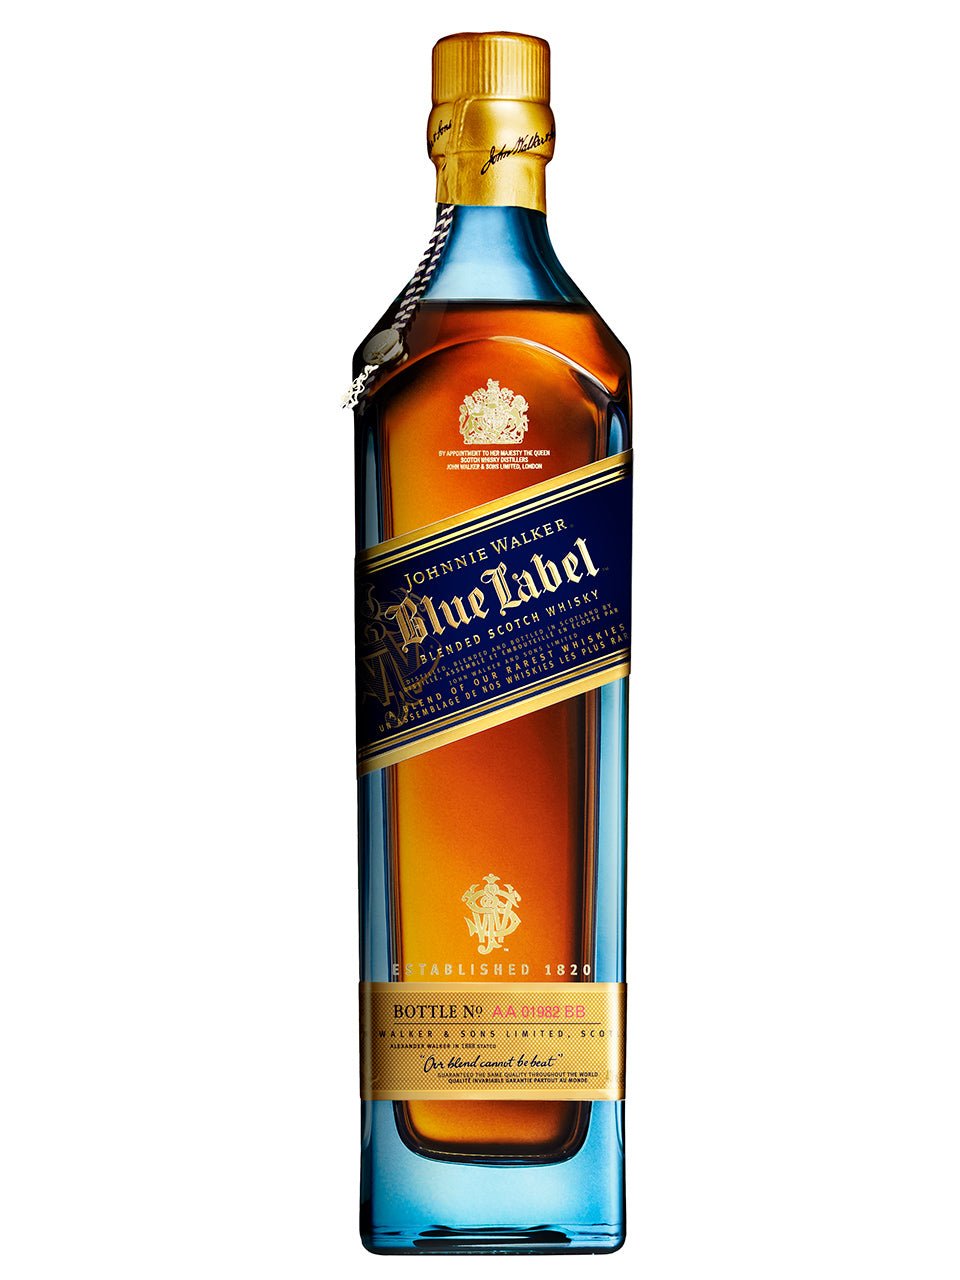 Johnnie Walker Blue Label Scotch Whisky | Exquisite Wine & Alcohol Gift Delivery Toronto Canada | Vyno